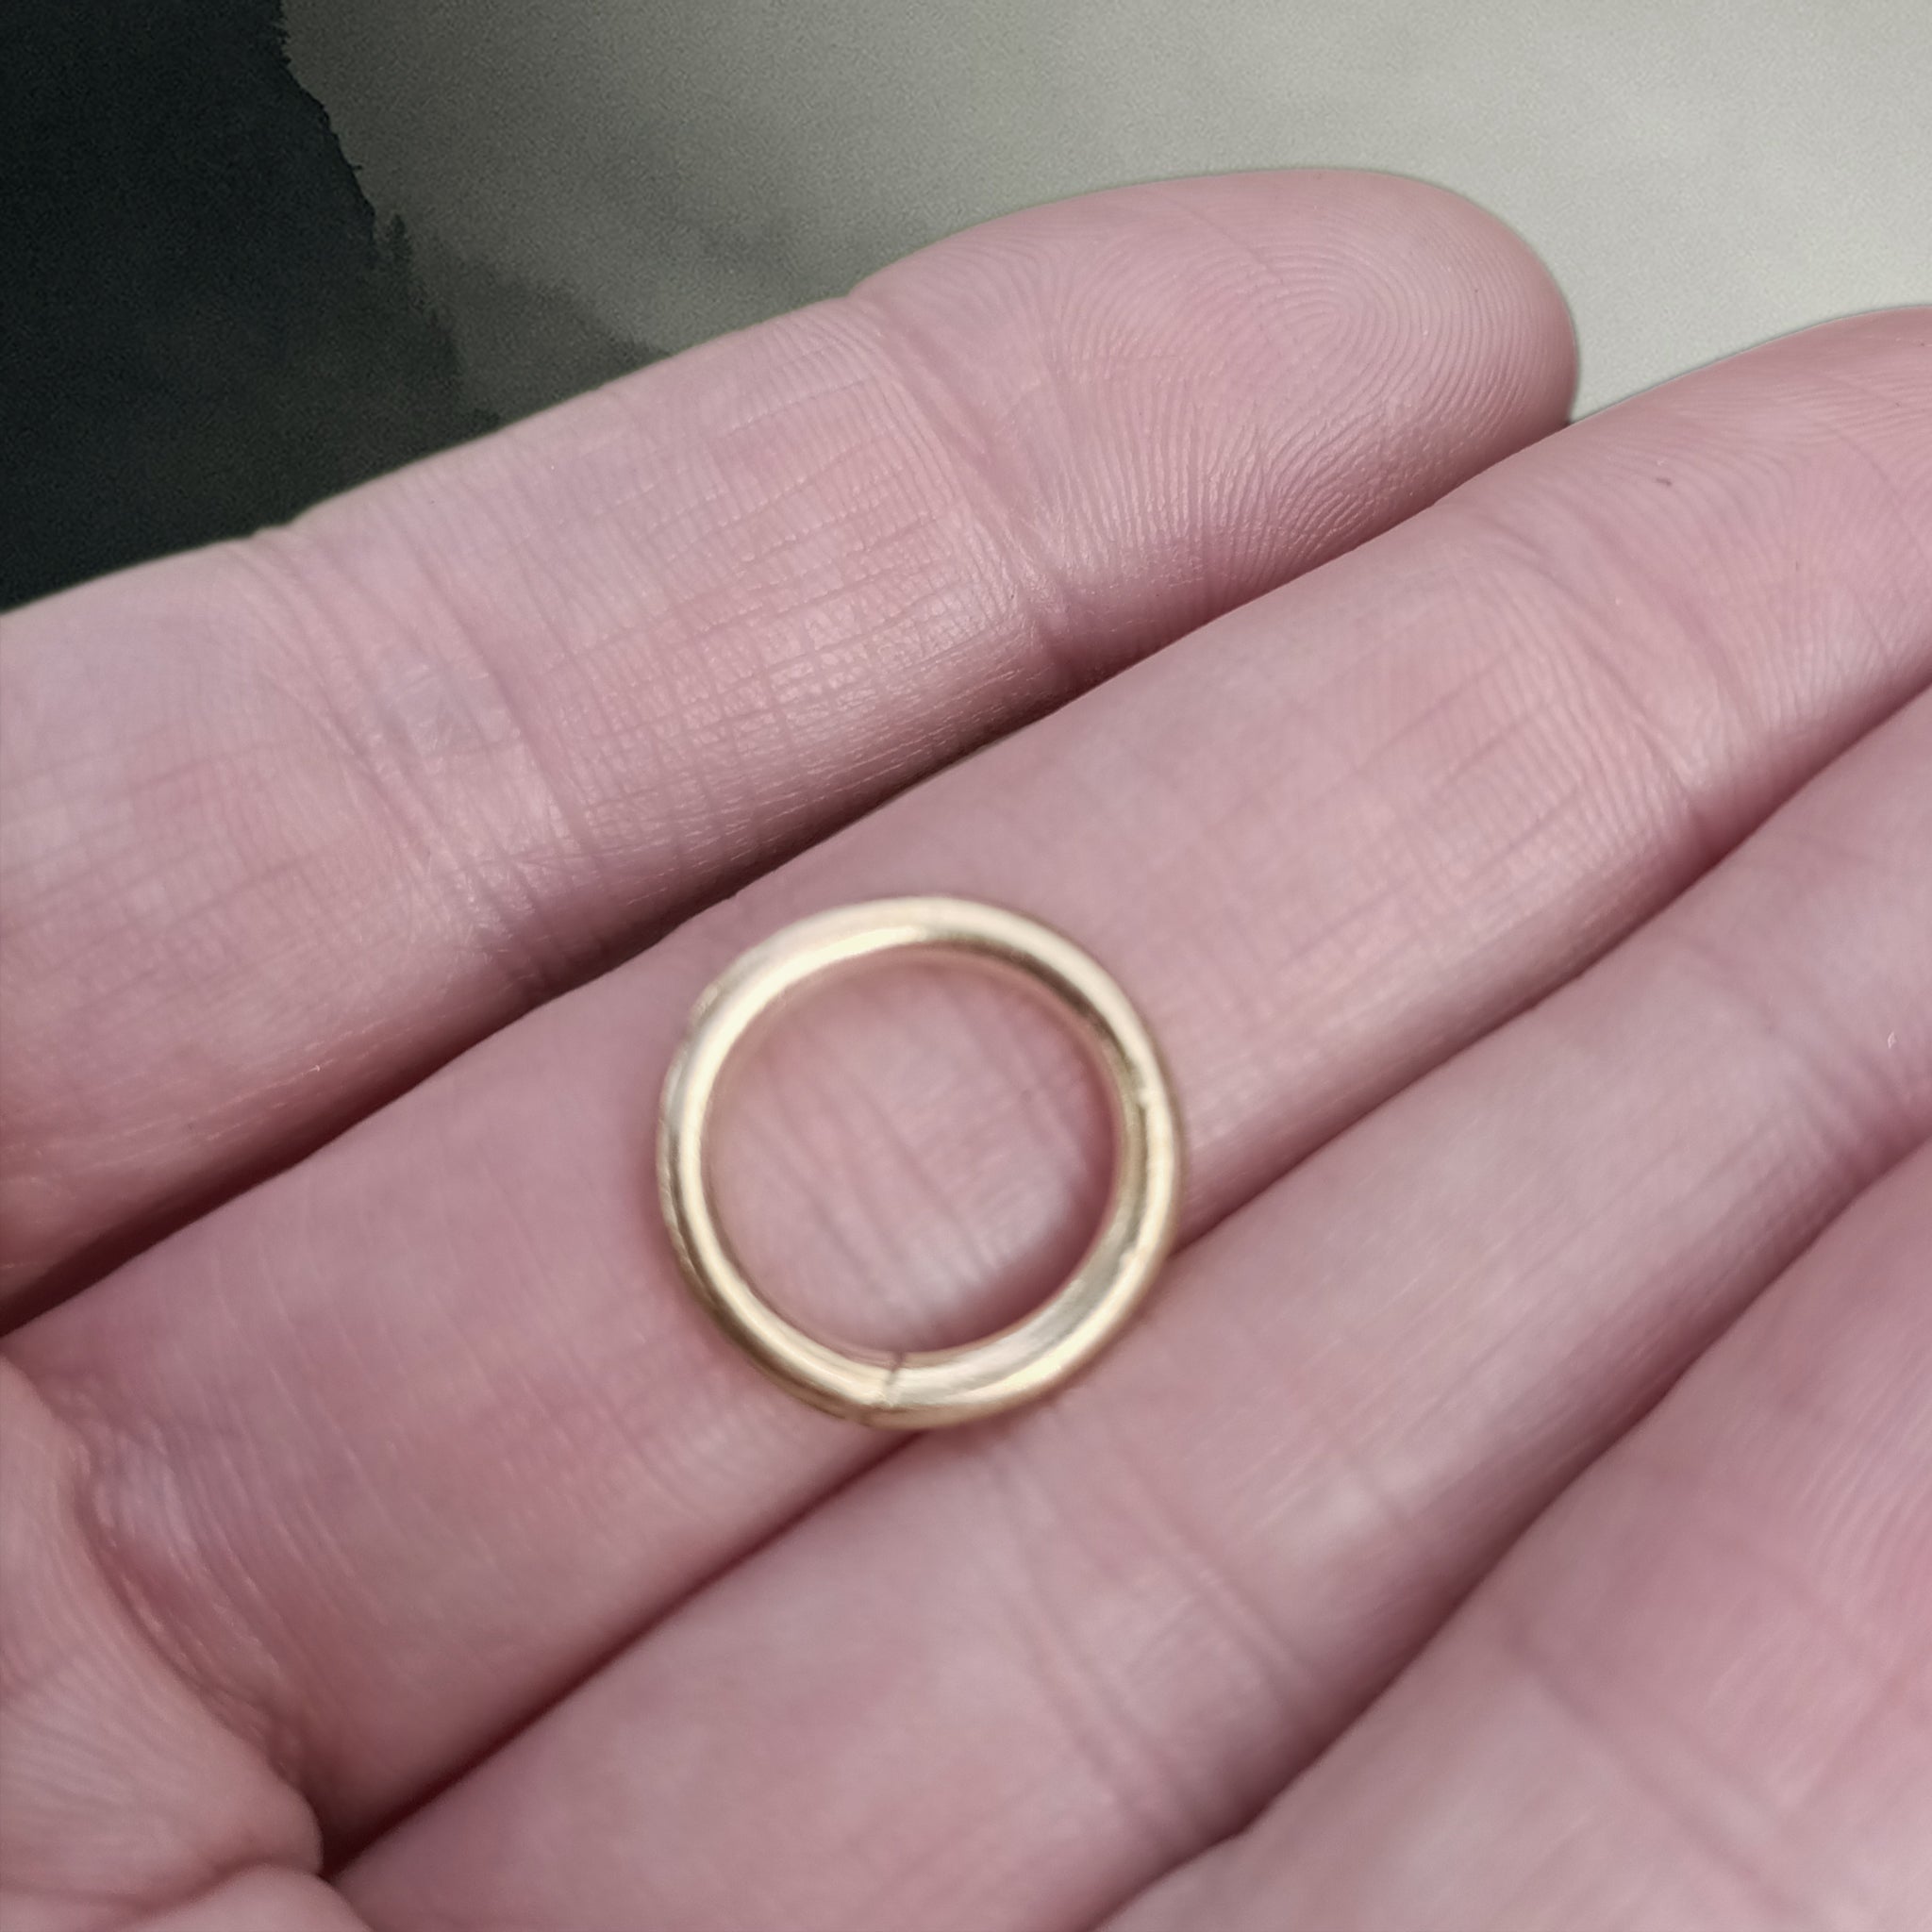 Small Brass Simple Split Ring on Hand - Viking Jewelry Fittings